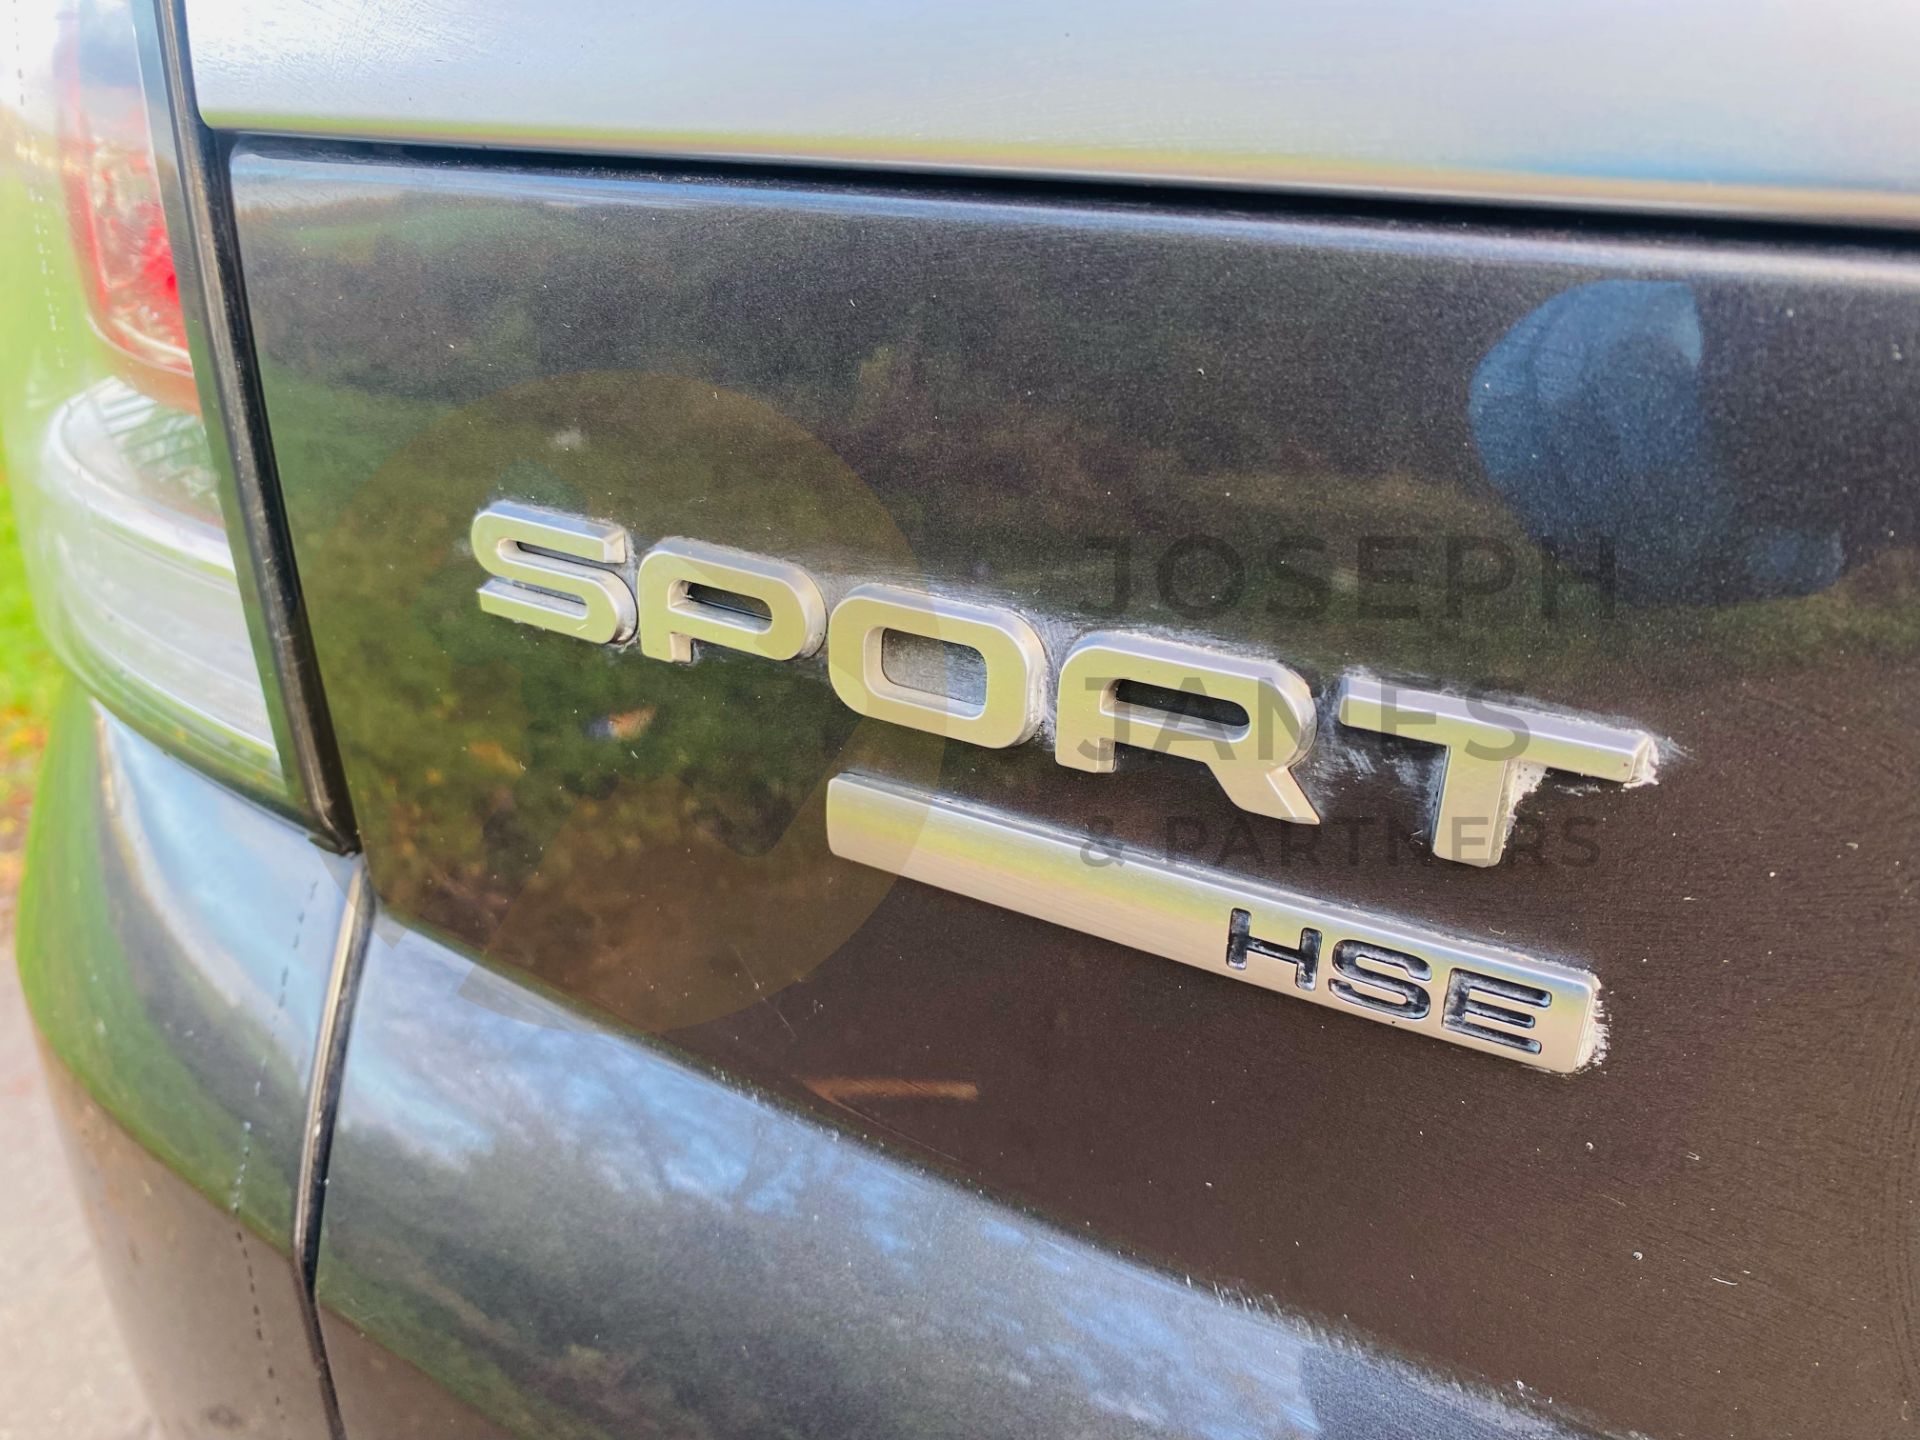 (ON SALE) RANGE ROVER SPORT "HSE" AUTO (NEW SHAPE) 17 REG - LEATHER - PANORAMIC ROOF - SAT NAV - - Image 13 of 47